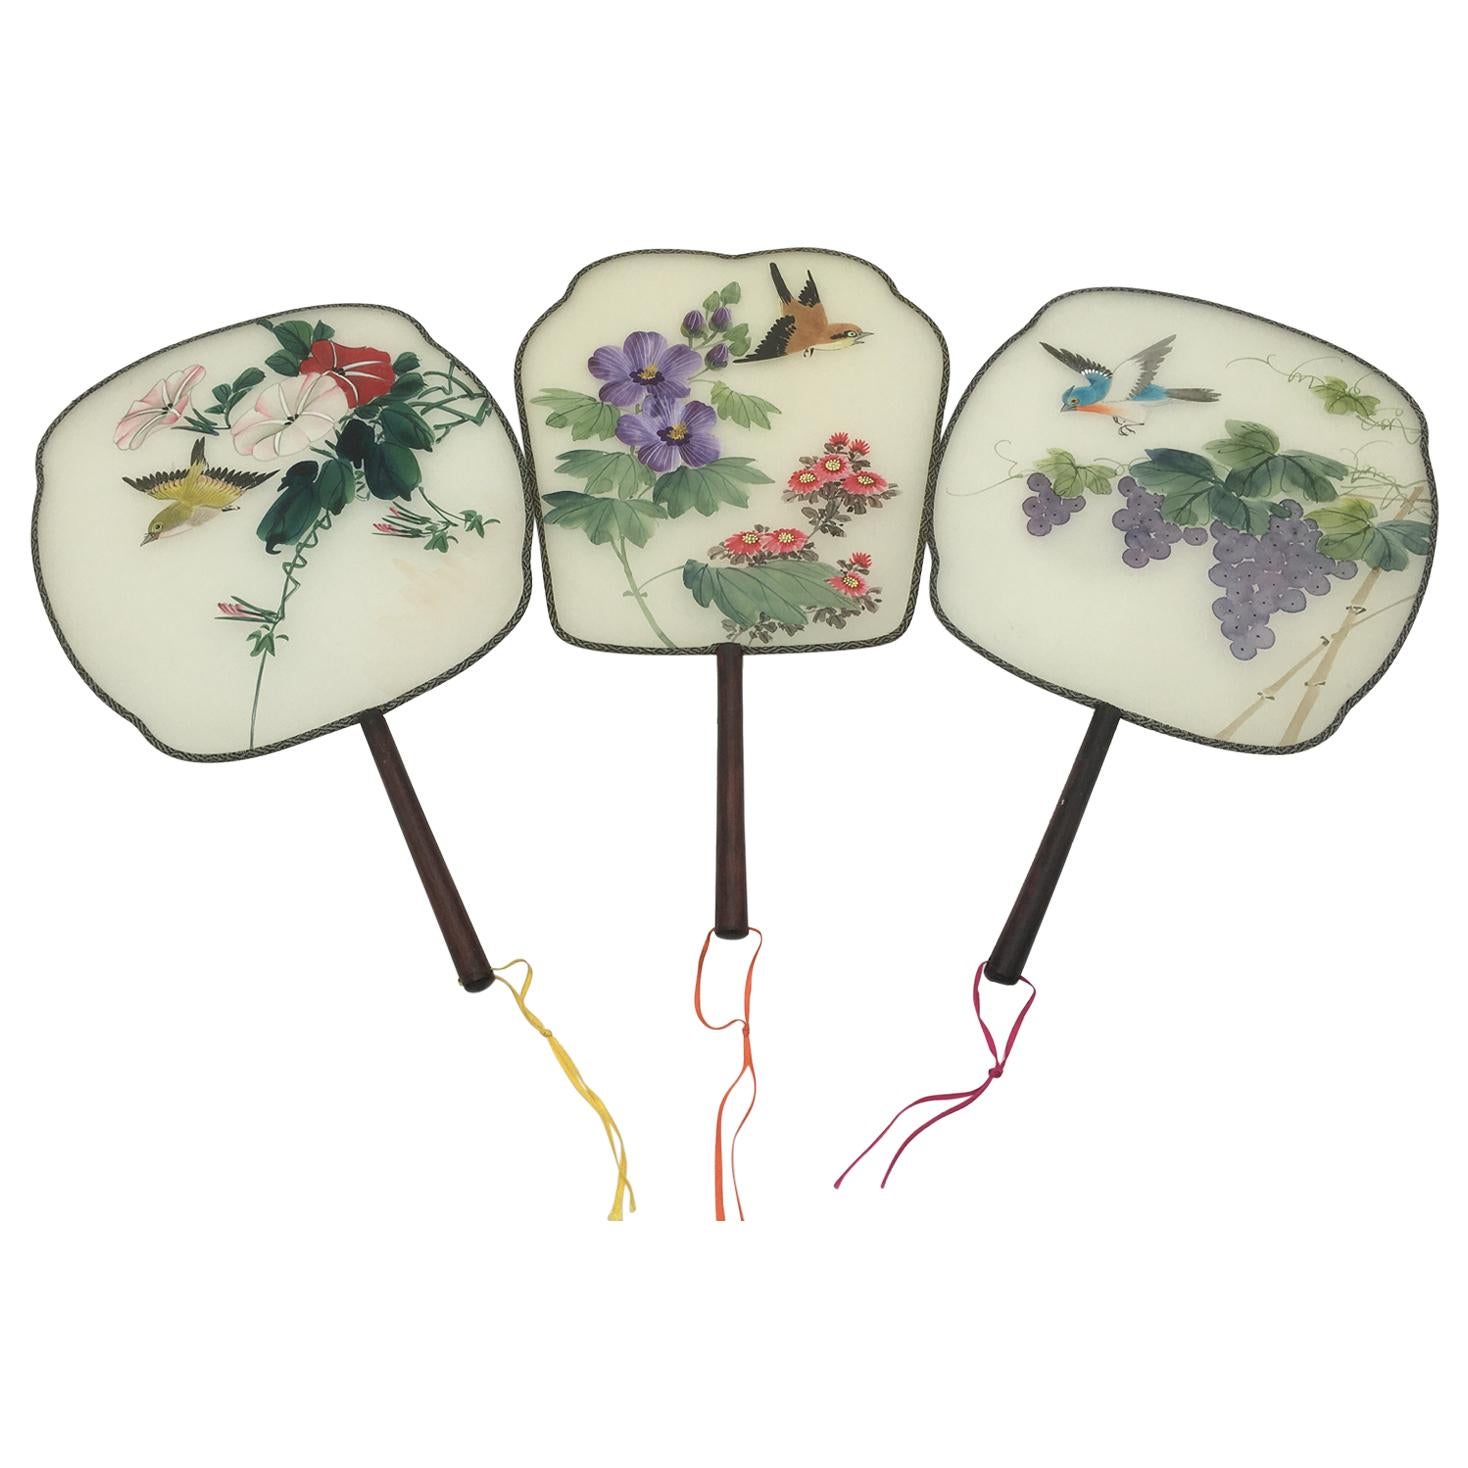 China Set of Three Silk Hand Painted Rigid Fans 'Pay-Pay', circa 1900 For Sale